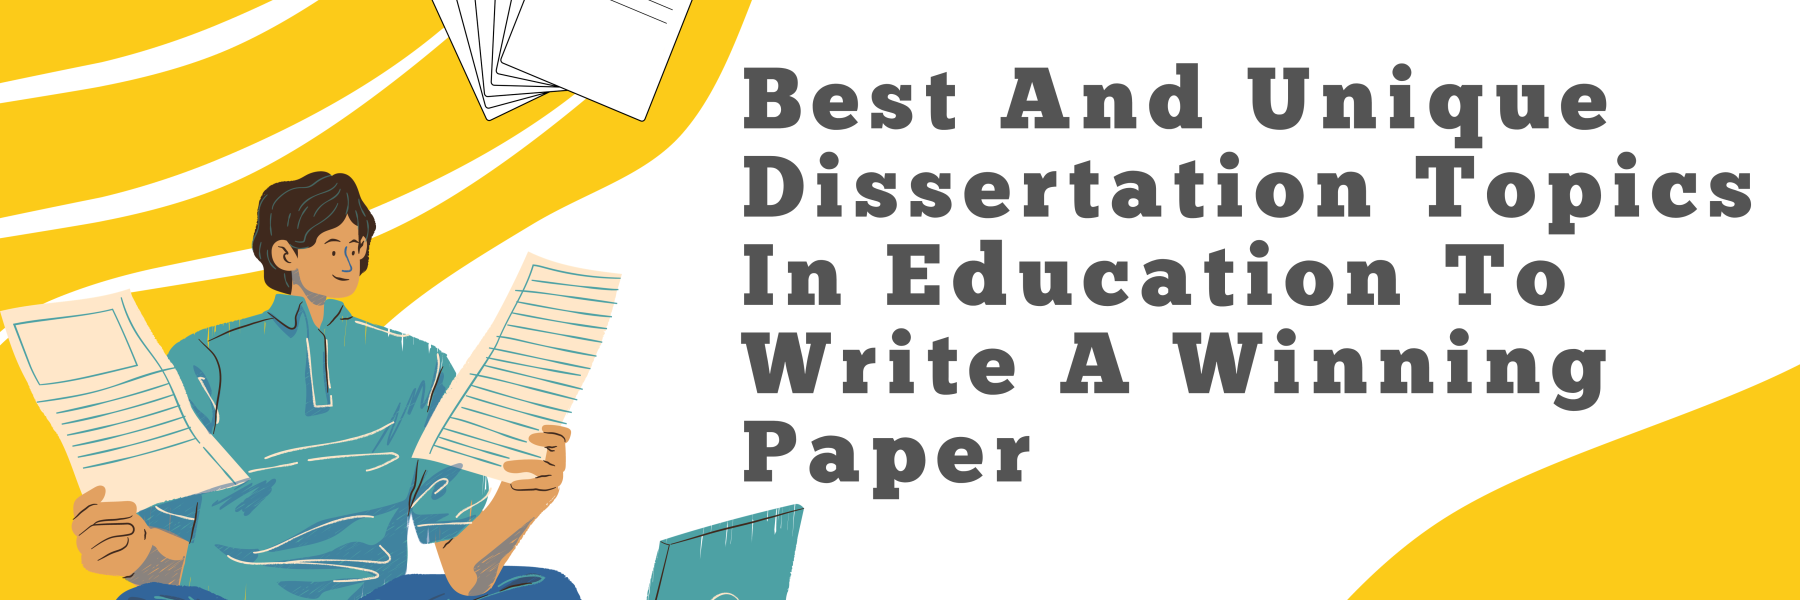 Best And Unique Dissertation Topics In Education To Write A Winning Paper